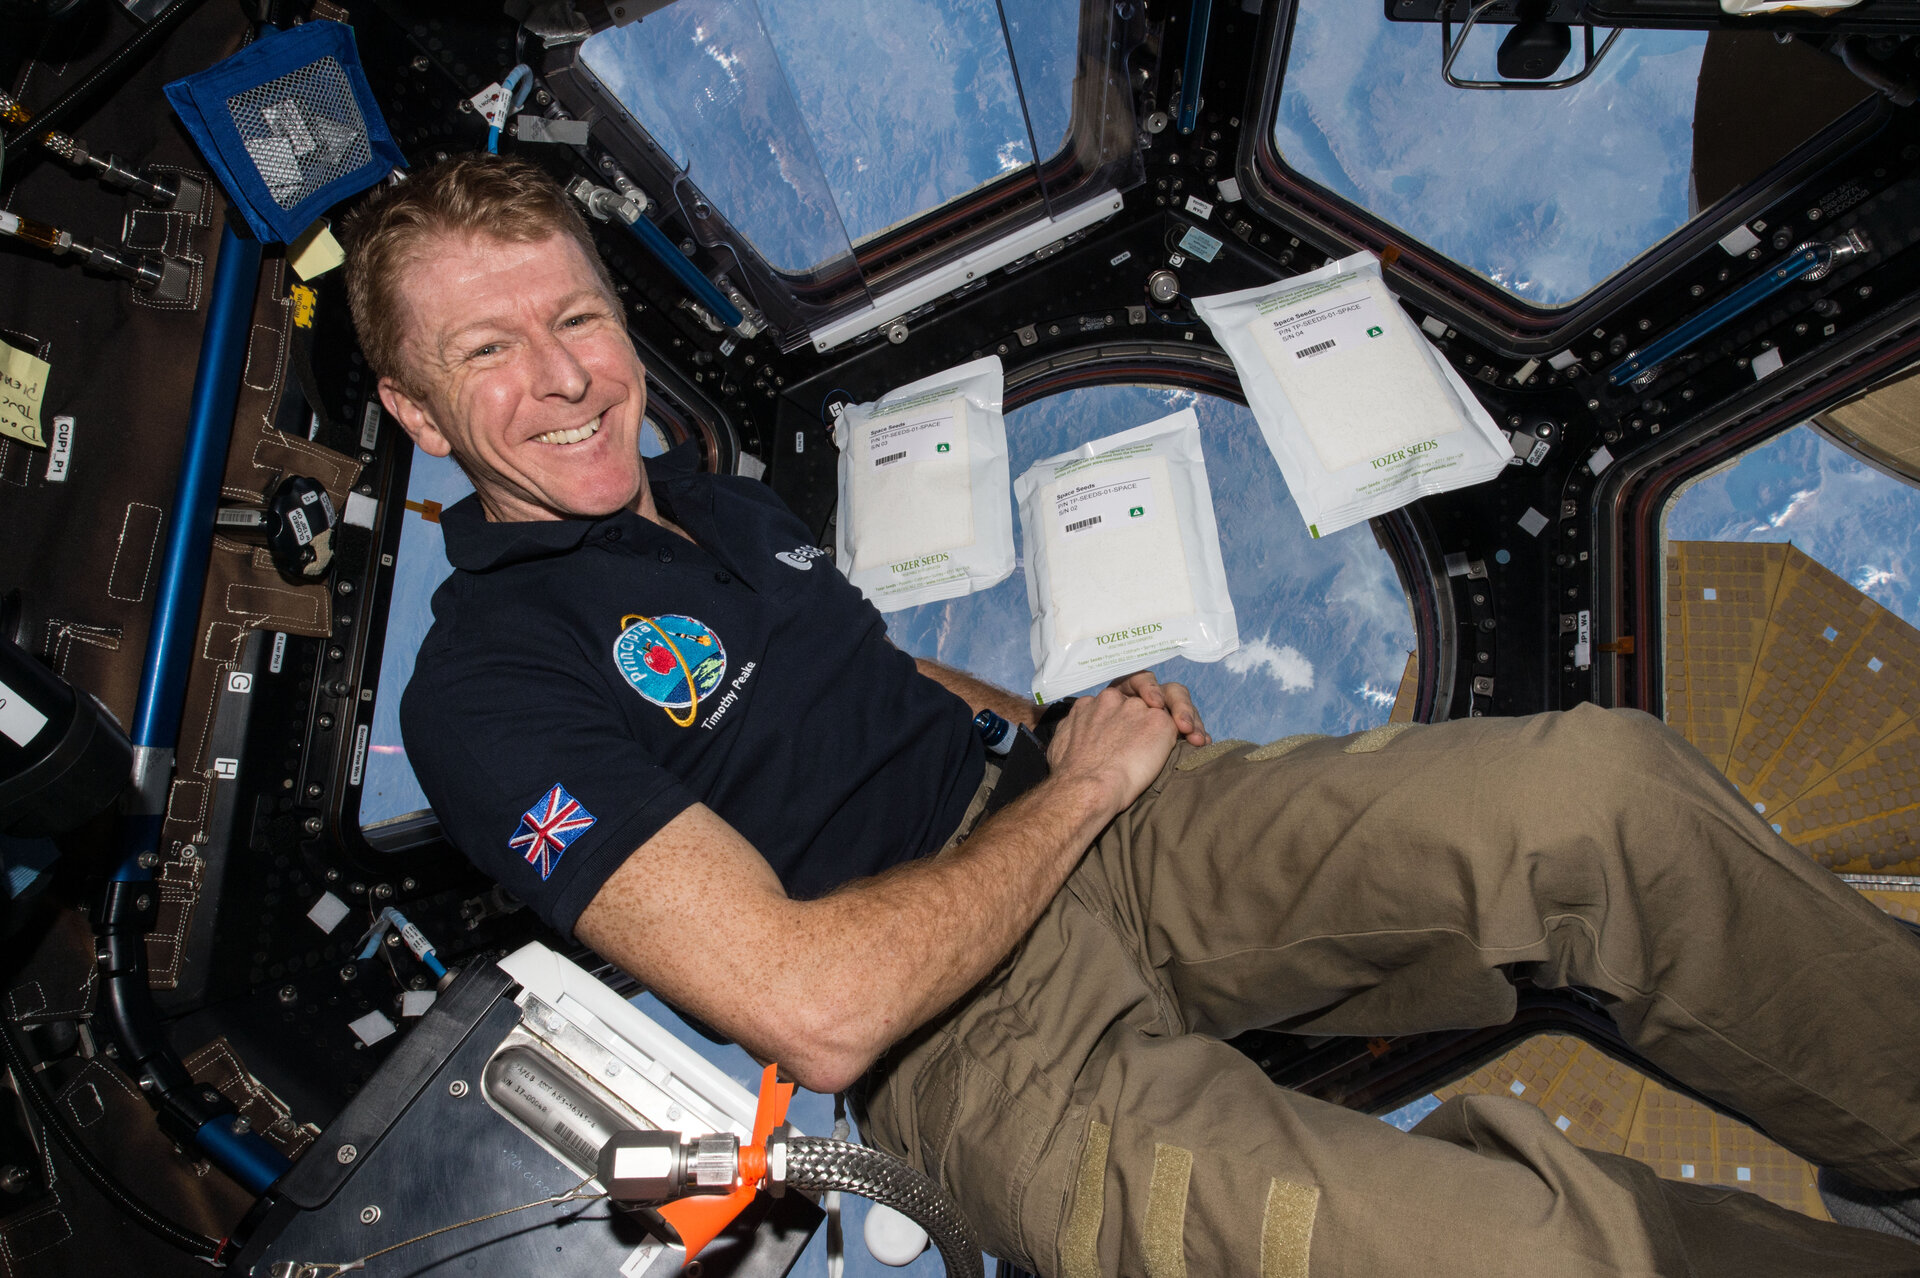 Tim Peake, Advisory Board Member of Skyrora, Collaborates with the UK Space Agency on a New Project